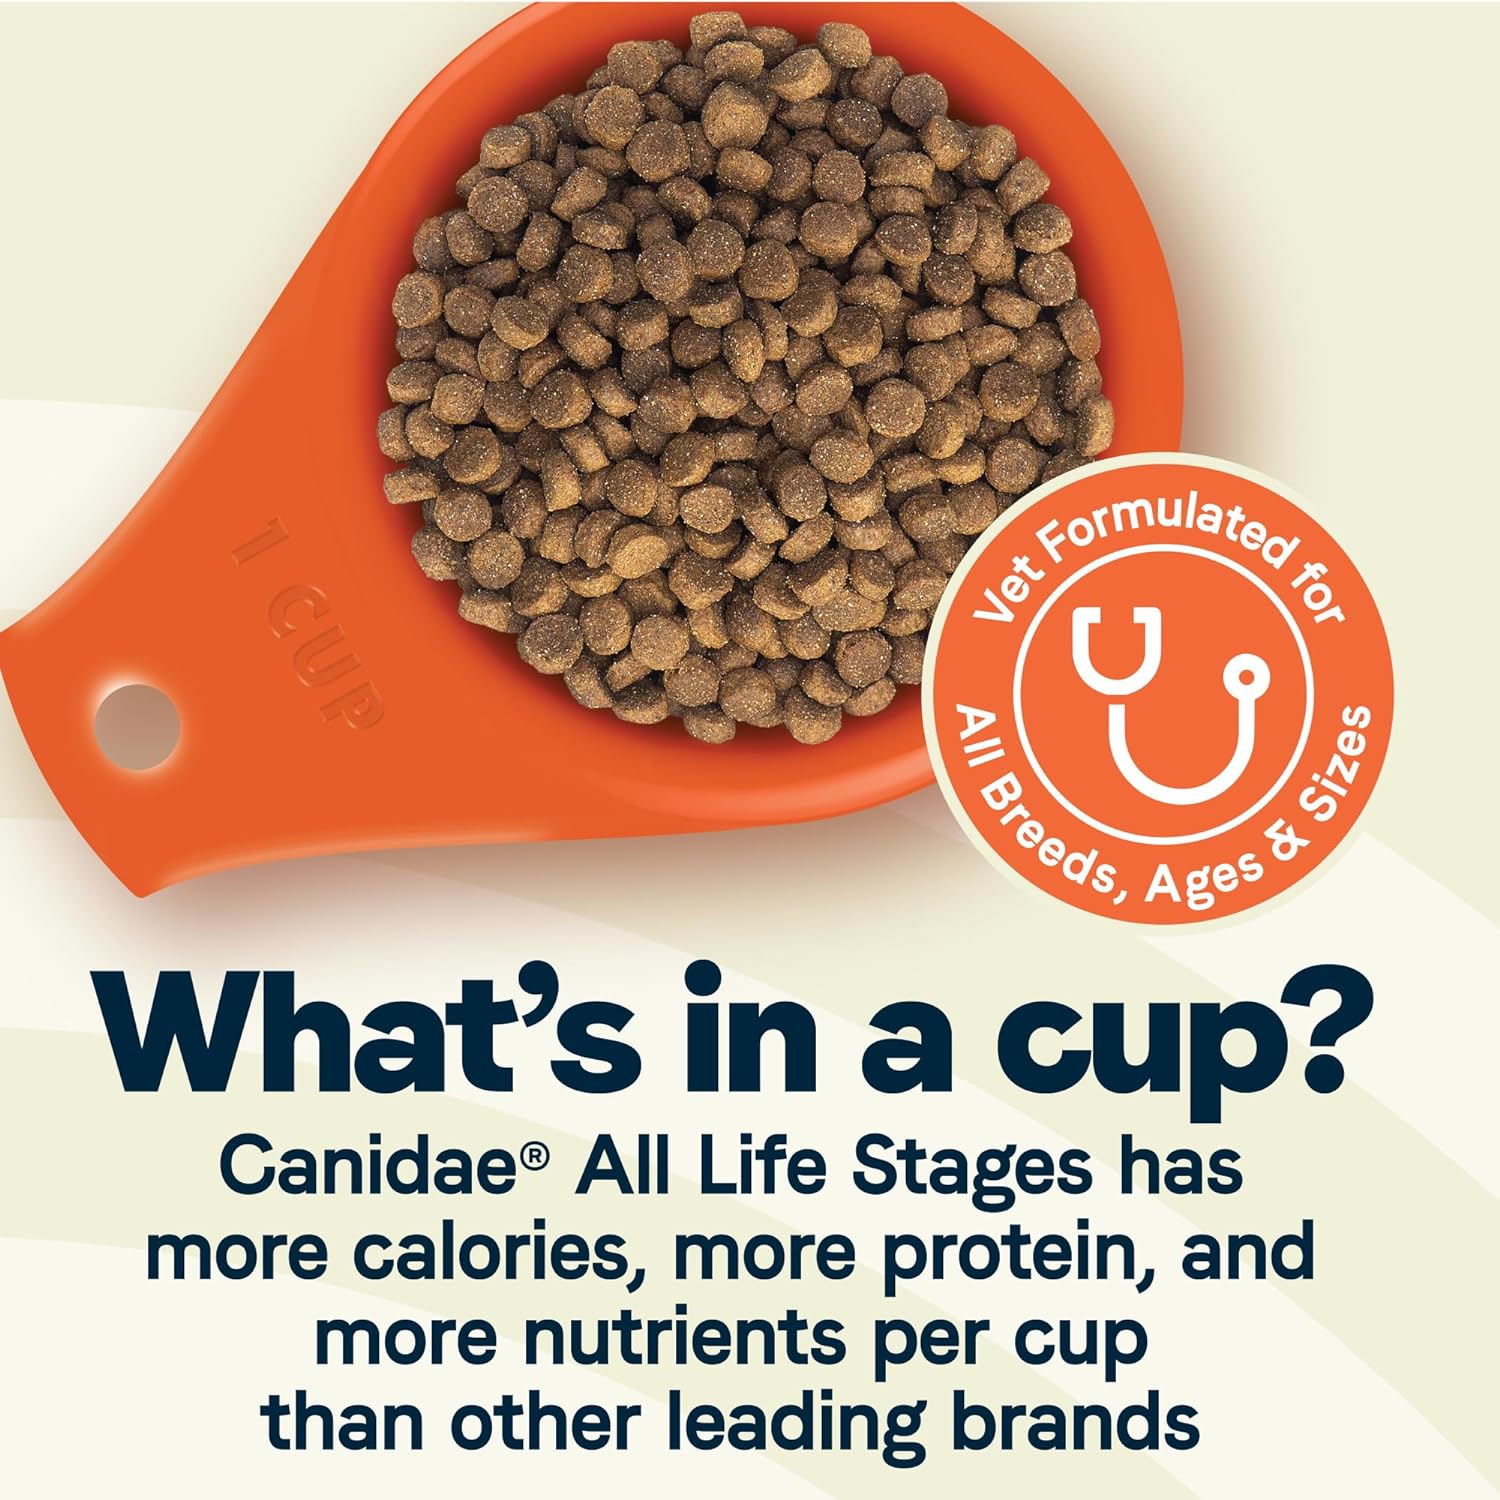 Canidae All Life Stages Premium Dry Dog Food for All Breeds, All Ages, Multi- Protein Chicken, Turkey, Lamb and Fish Meals Formula, 27 Pounds : Pet Supplies